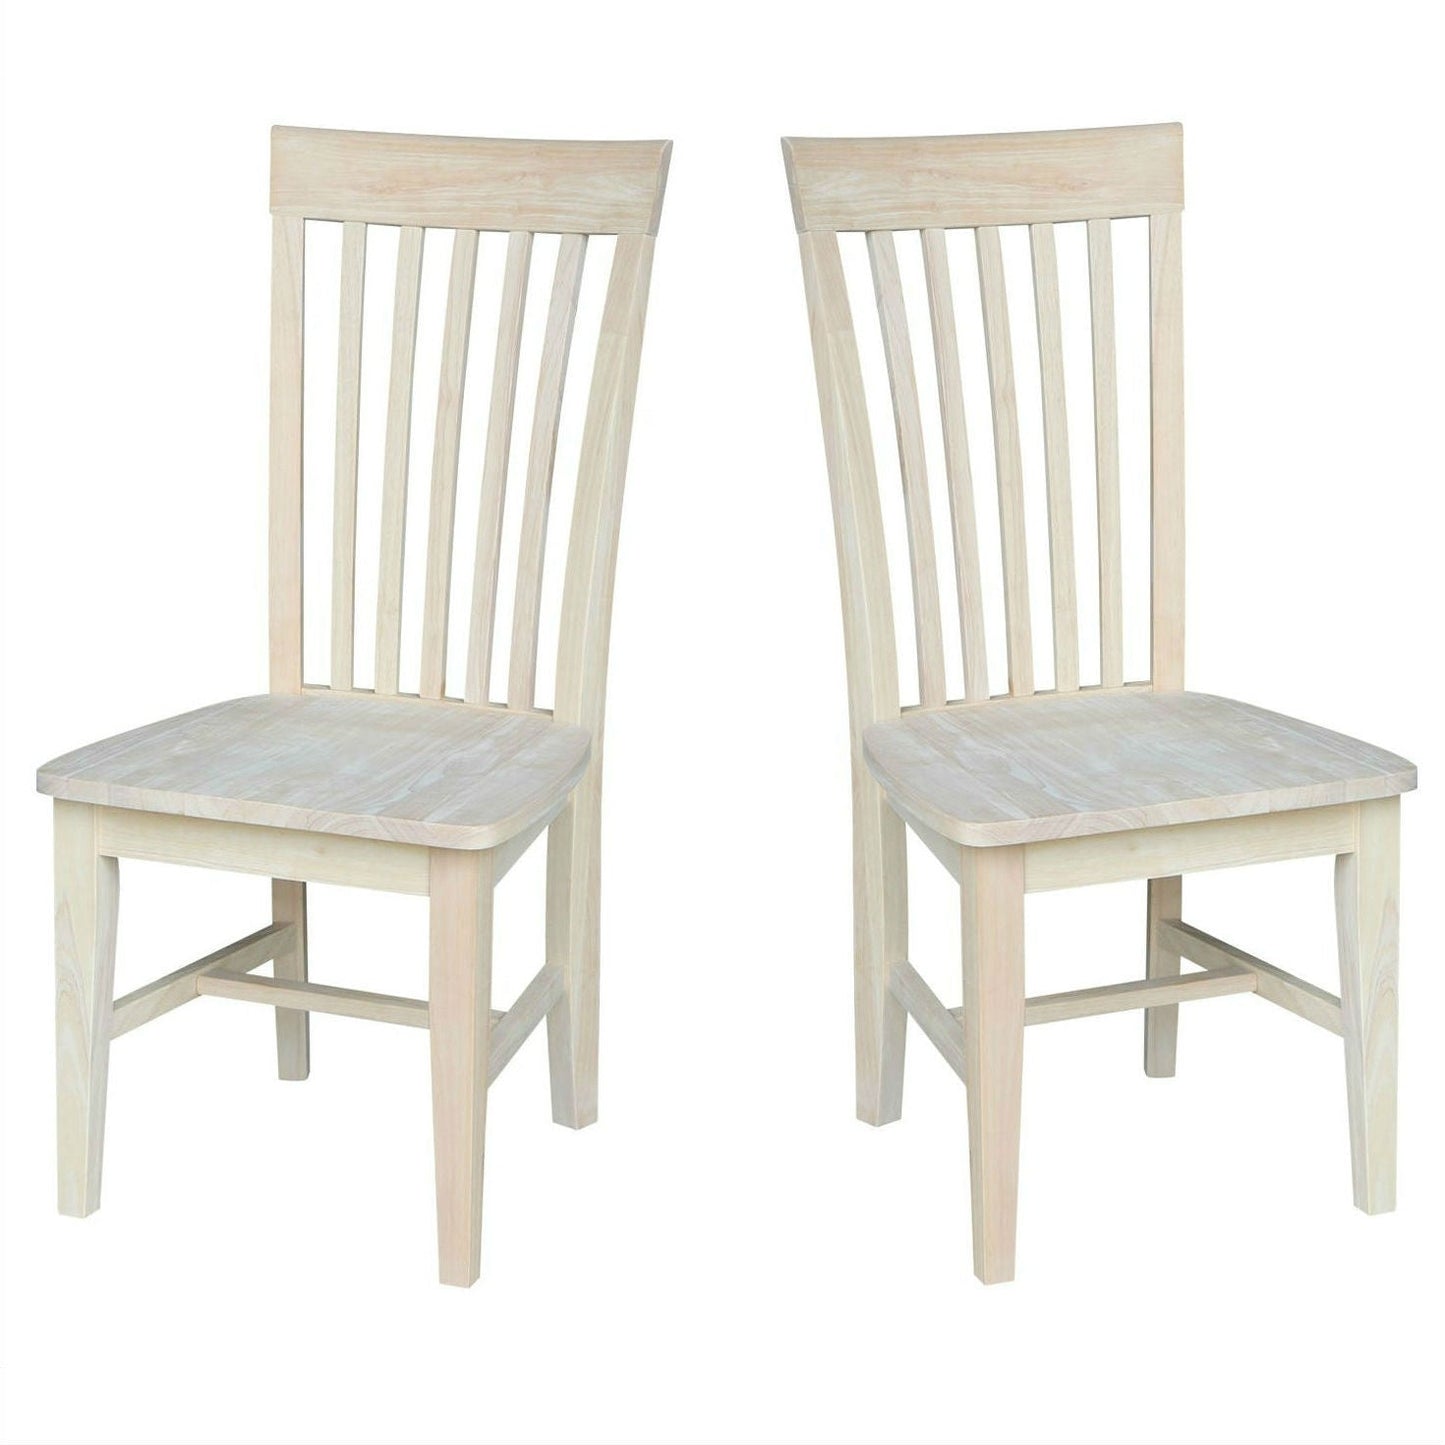 Dining > Dining Chairs - Set Of 2 - Mission Style Unfinished Wood Dining Chair With High Back